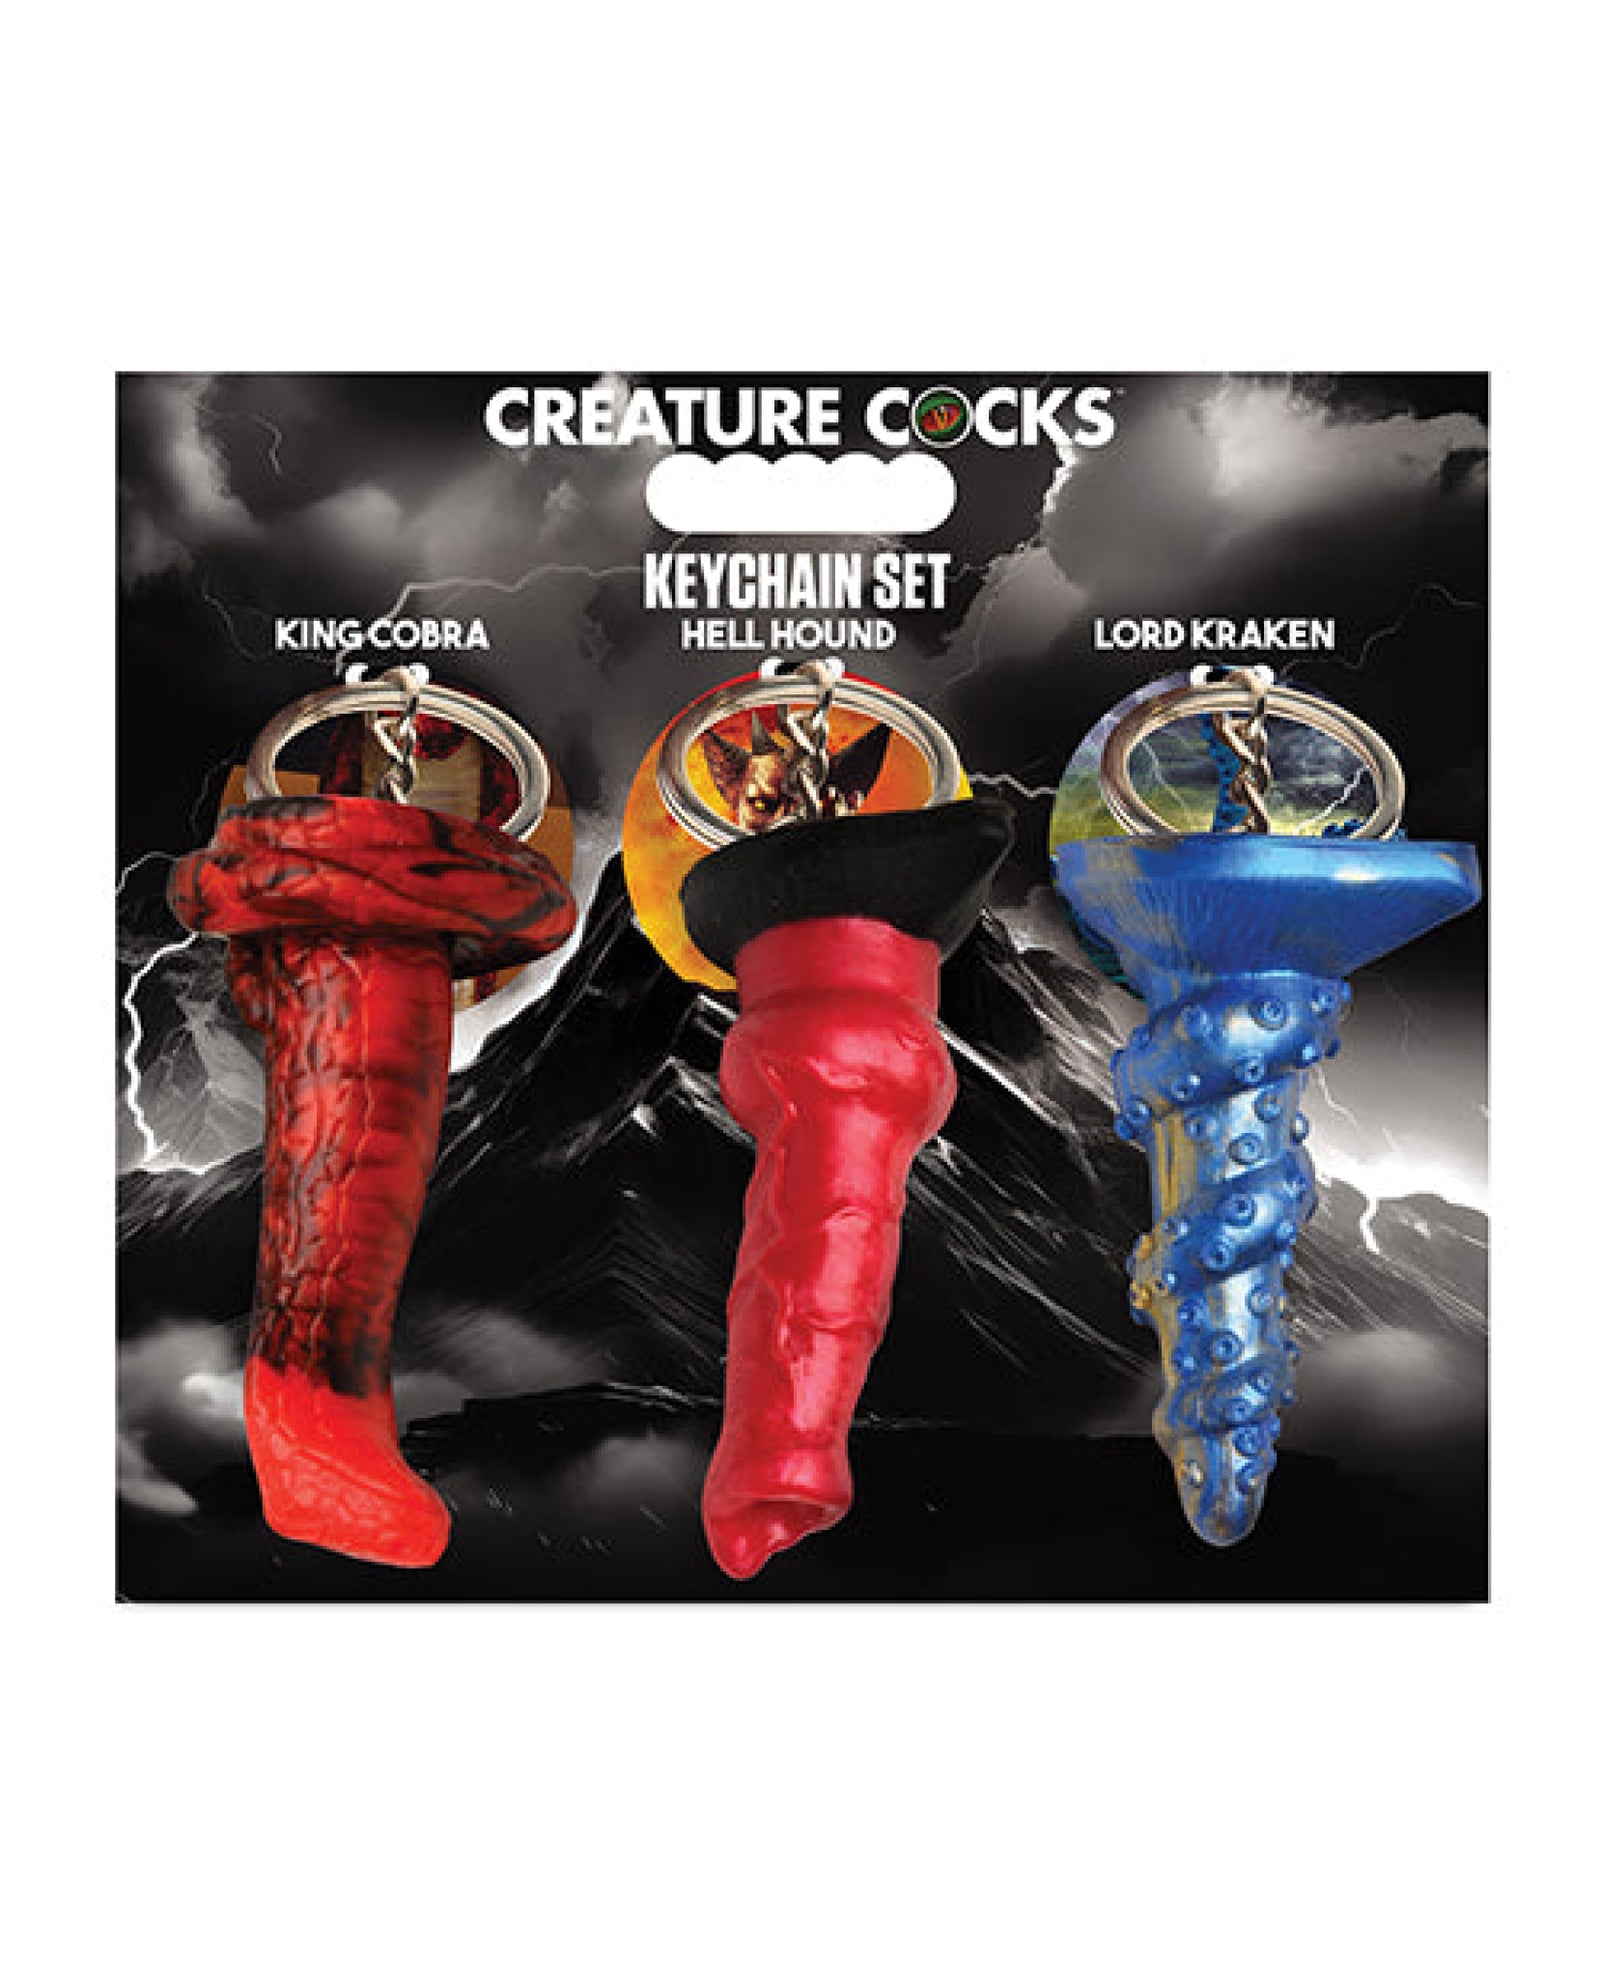 Creature Cocks Hell-Hound, Lord Kraken, & King Cobra Silicone Key Chain Set - Pack of 3 Multi Color Xr LLC